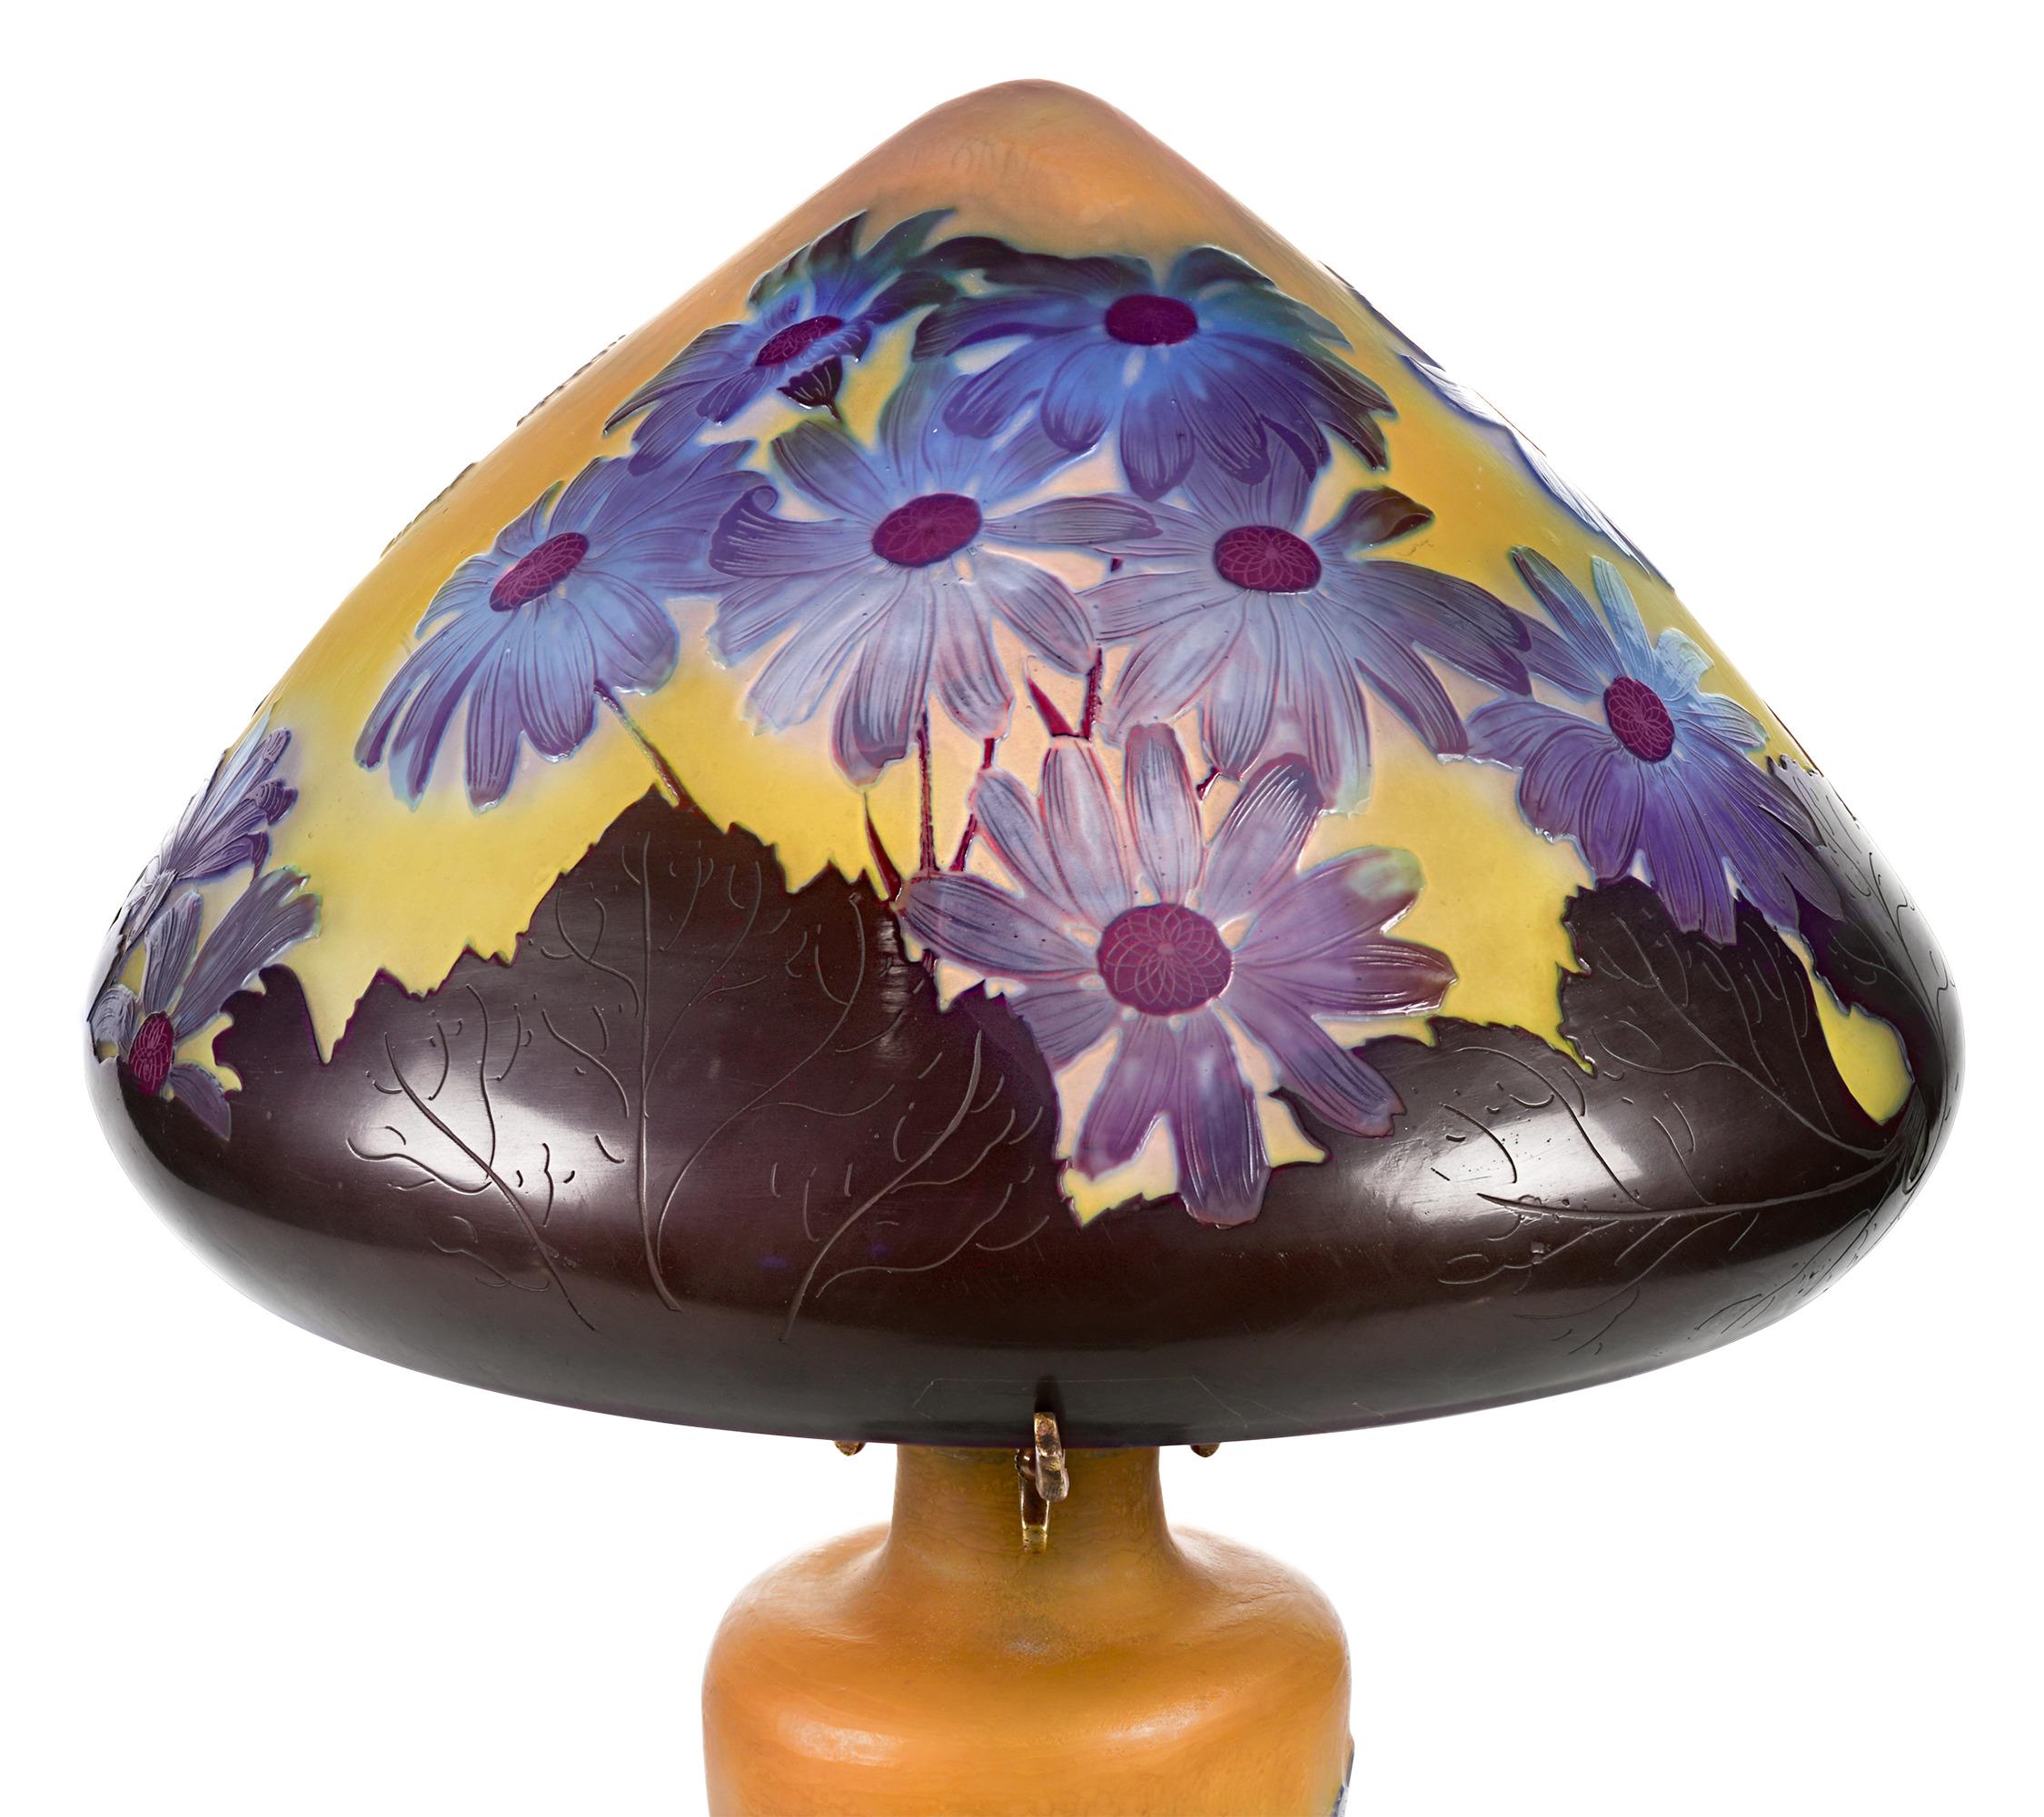 Statuesque and artfully etched, this exquisite cameo glass table lamp is the work of the famed Art Nouveau master Émile Gallé, one of the most highly regarded names in French glassmaking. The artist's appreciation of nature is on full display in the